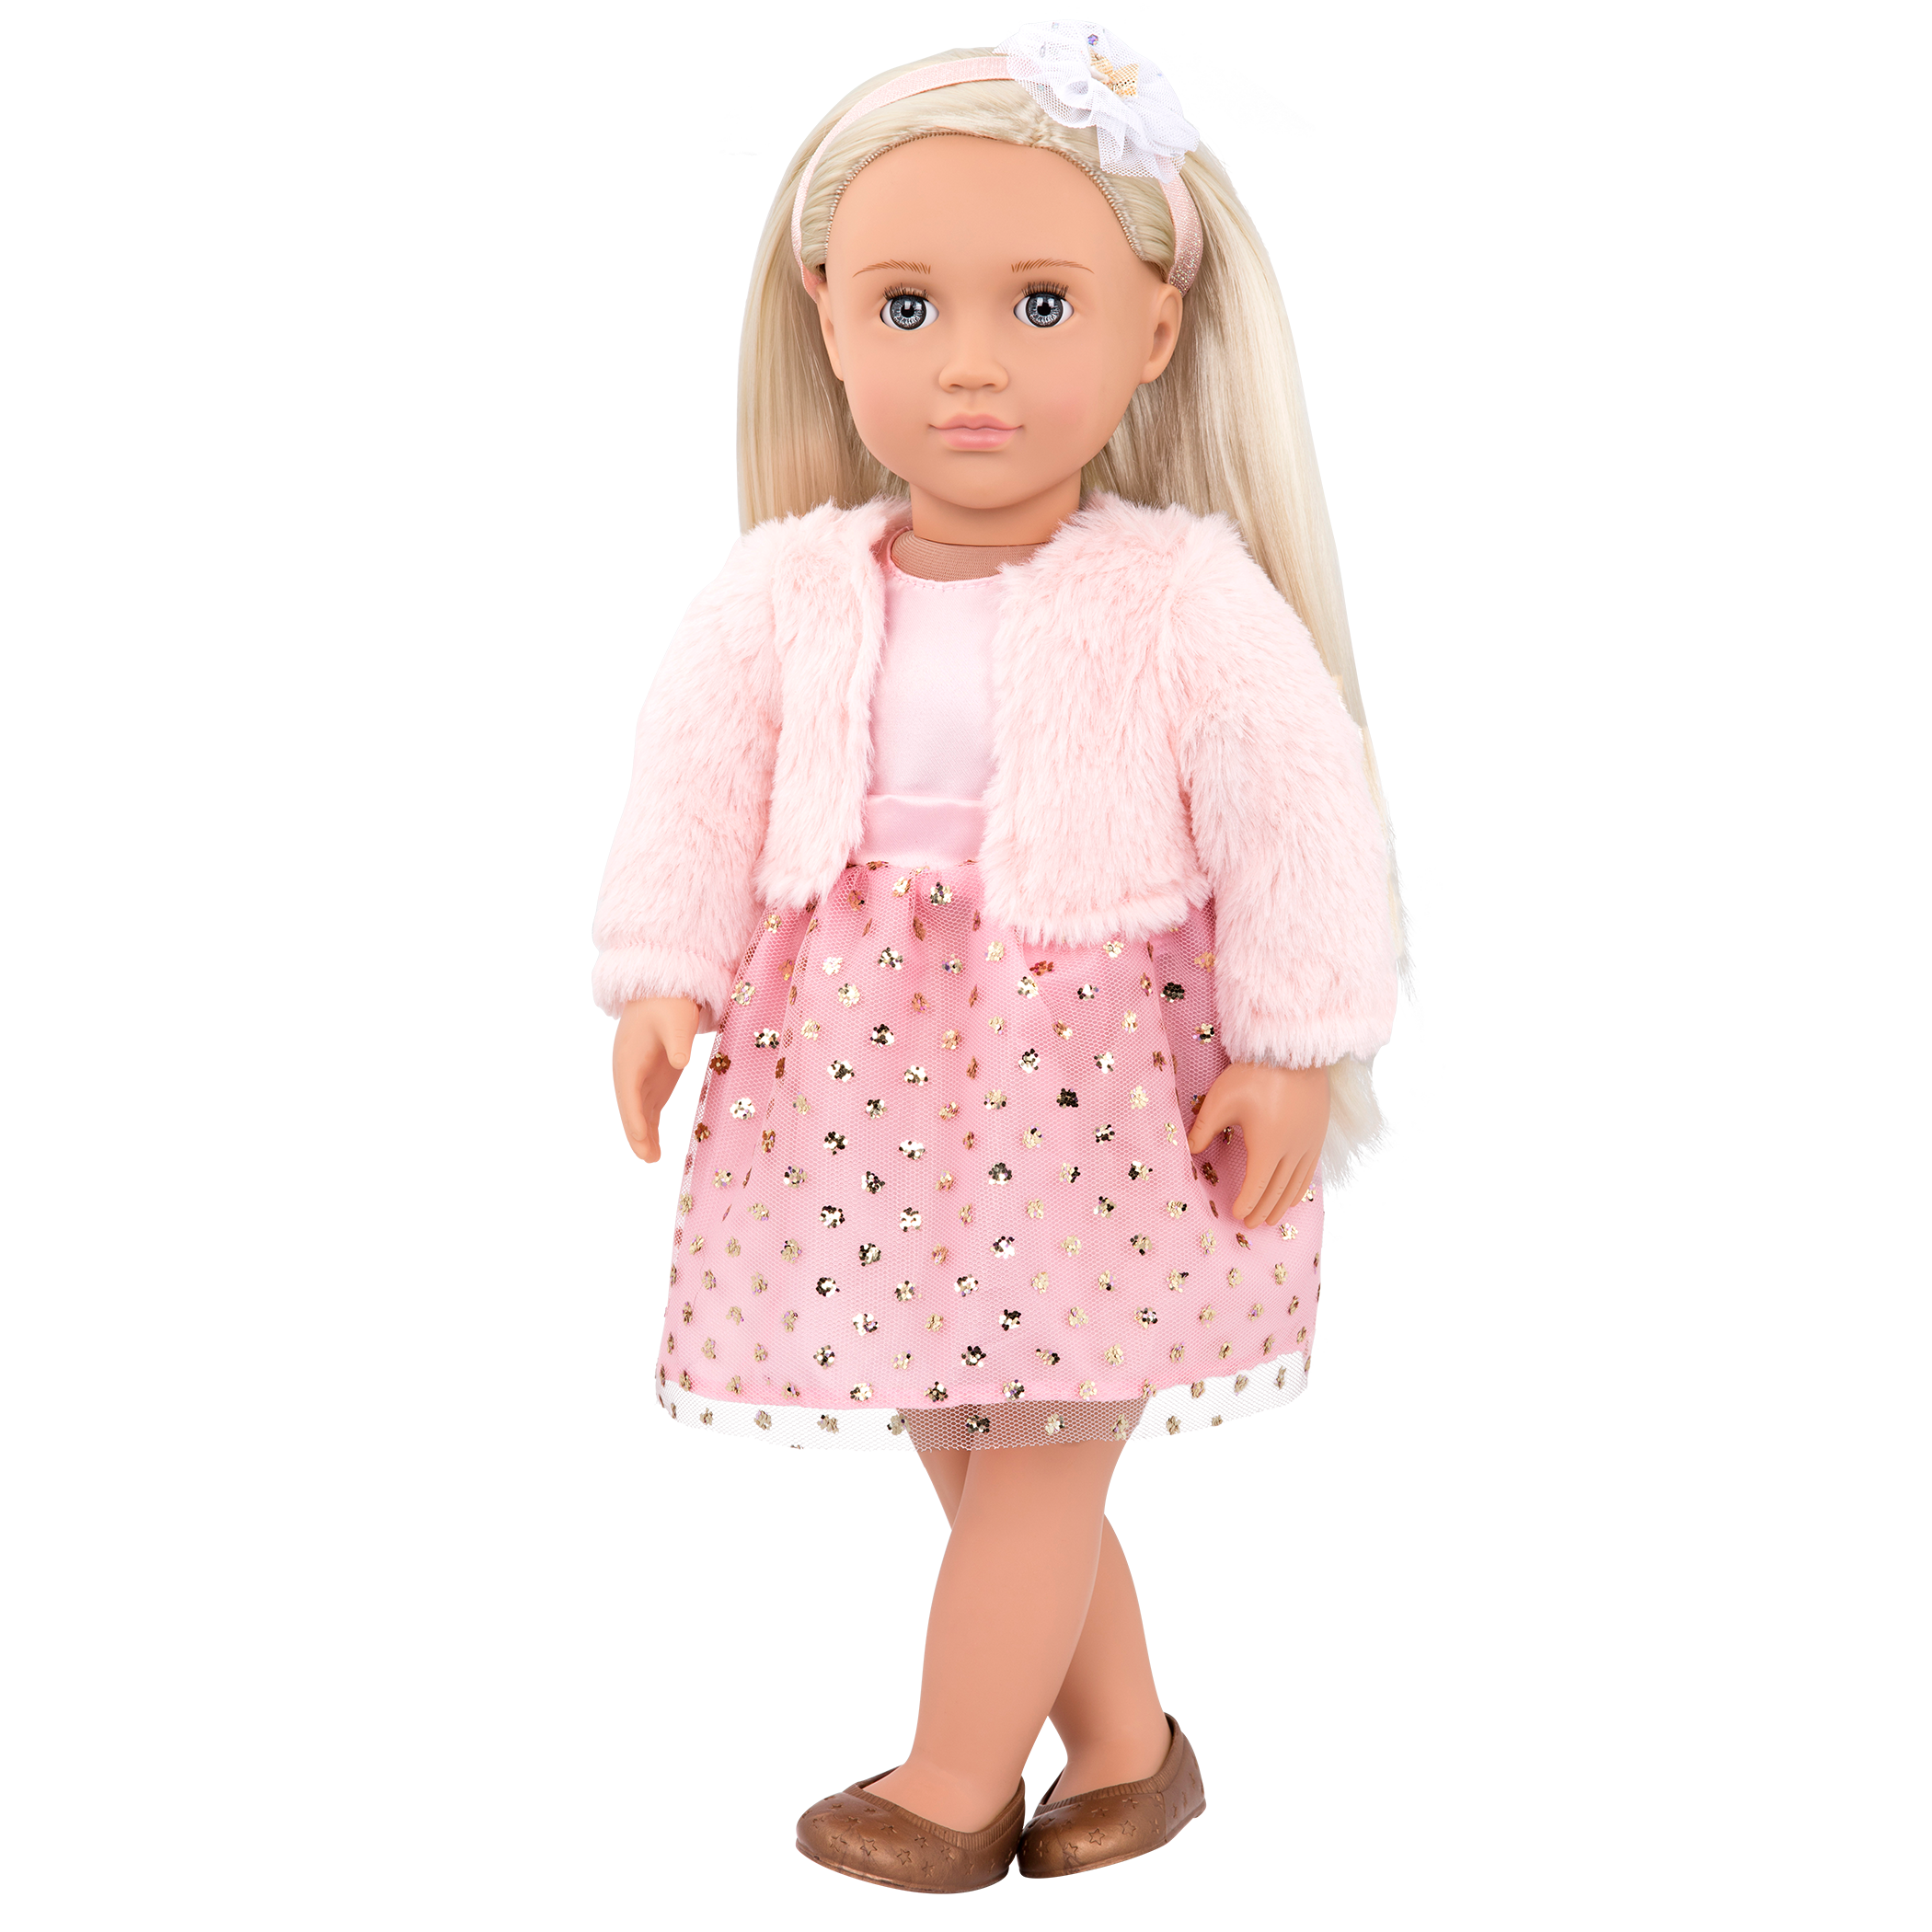 Millie Regular 18-inch Doll with legs crossed